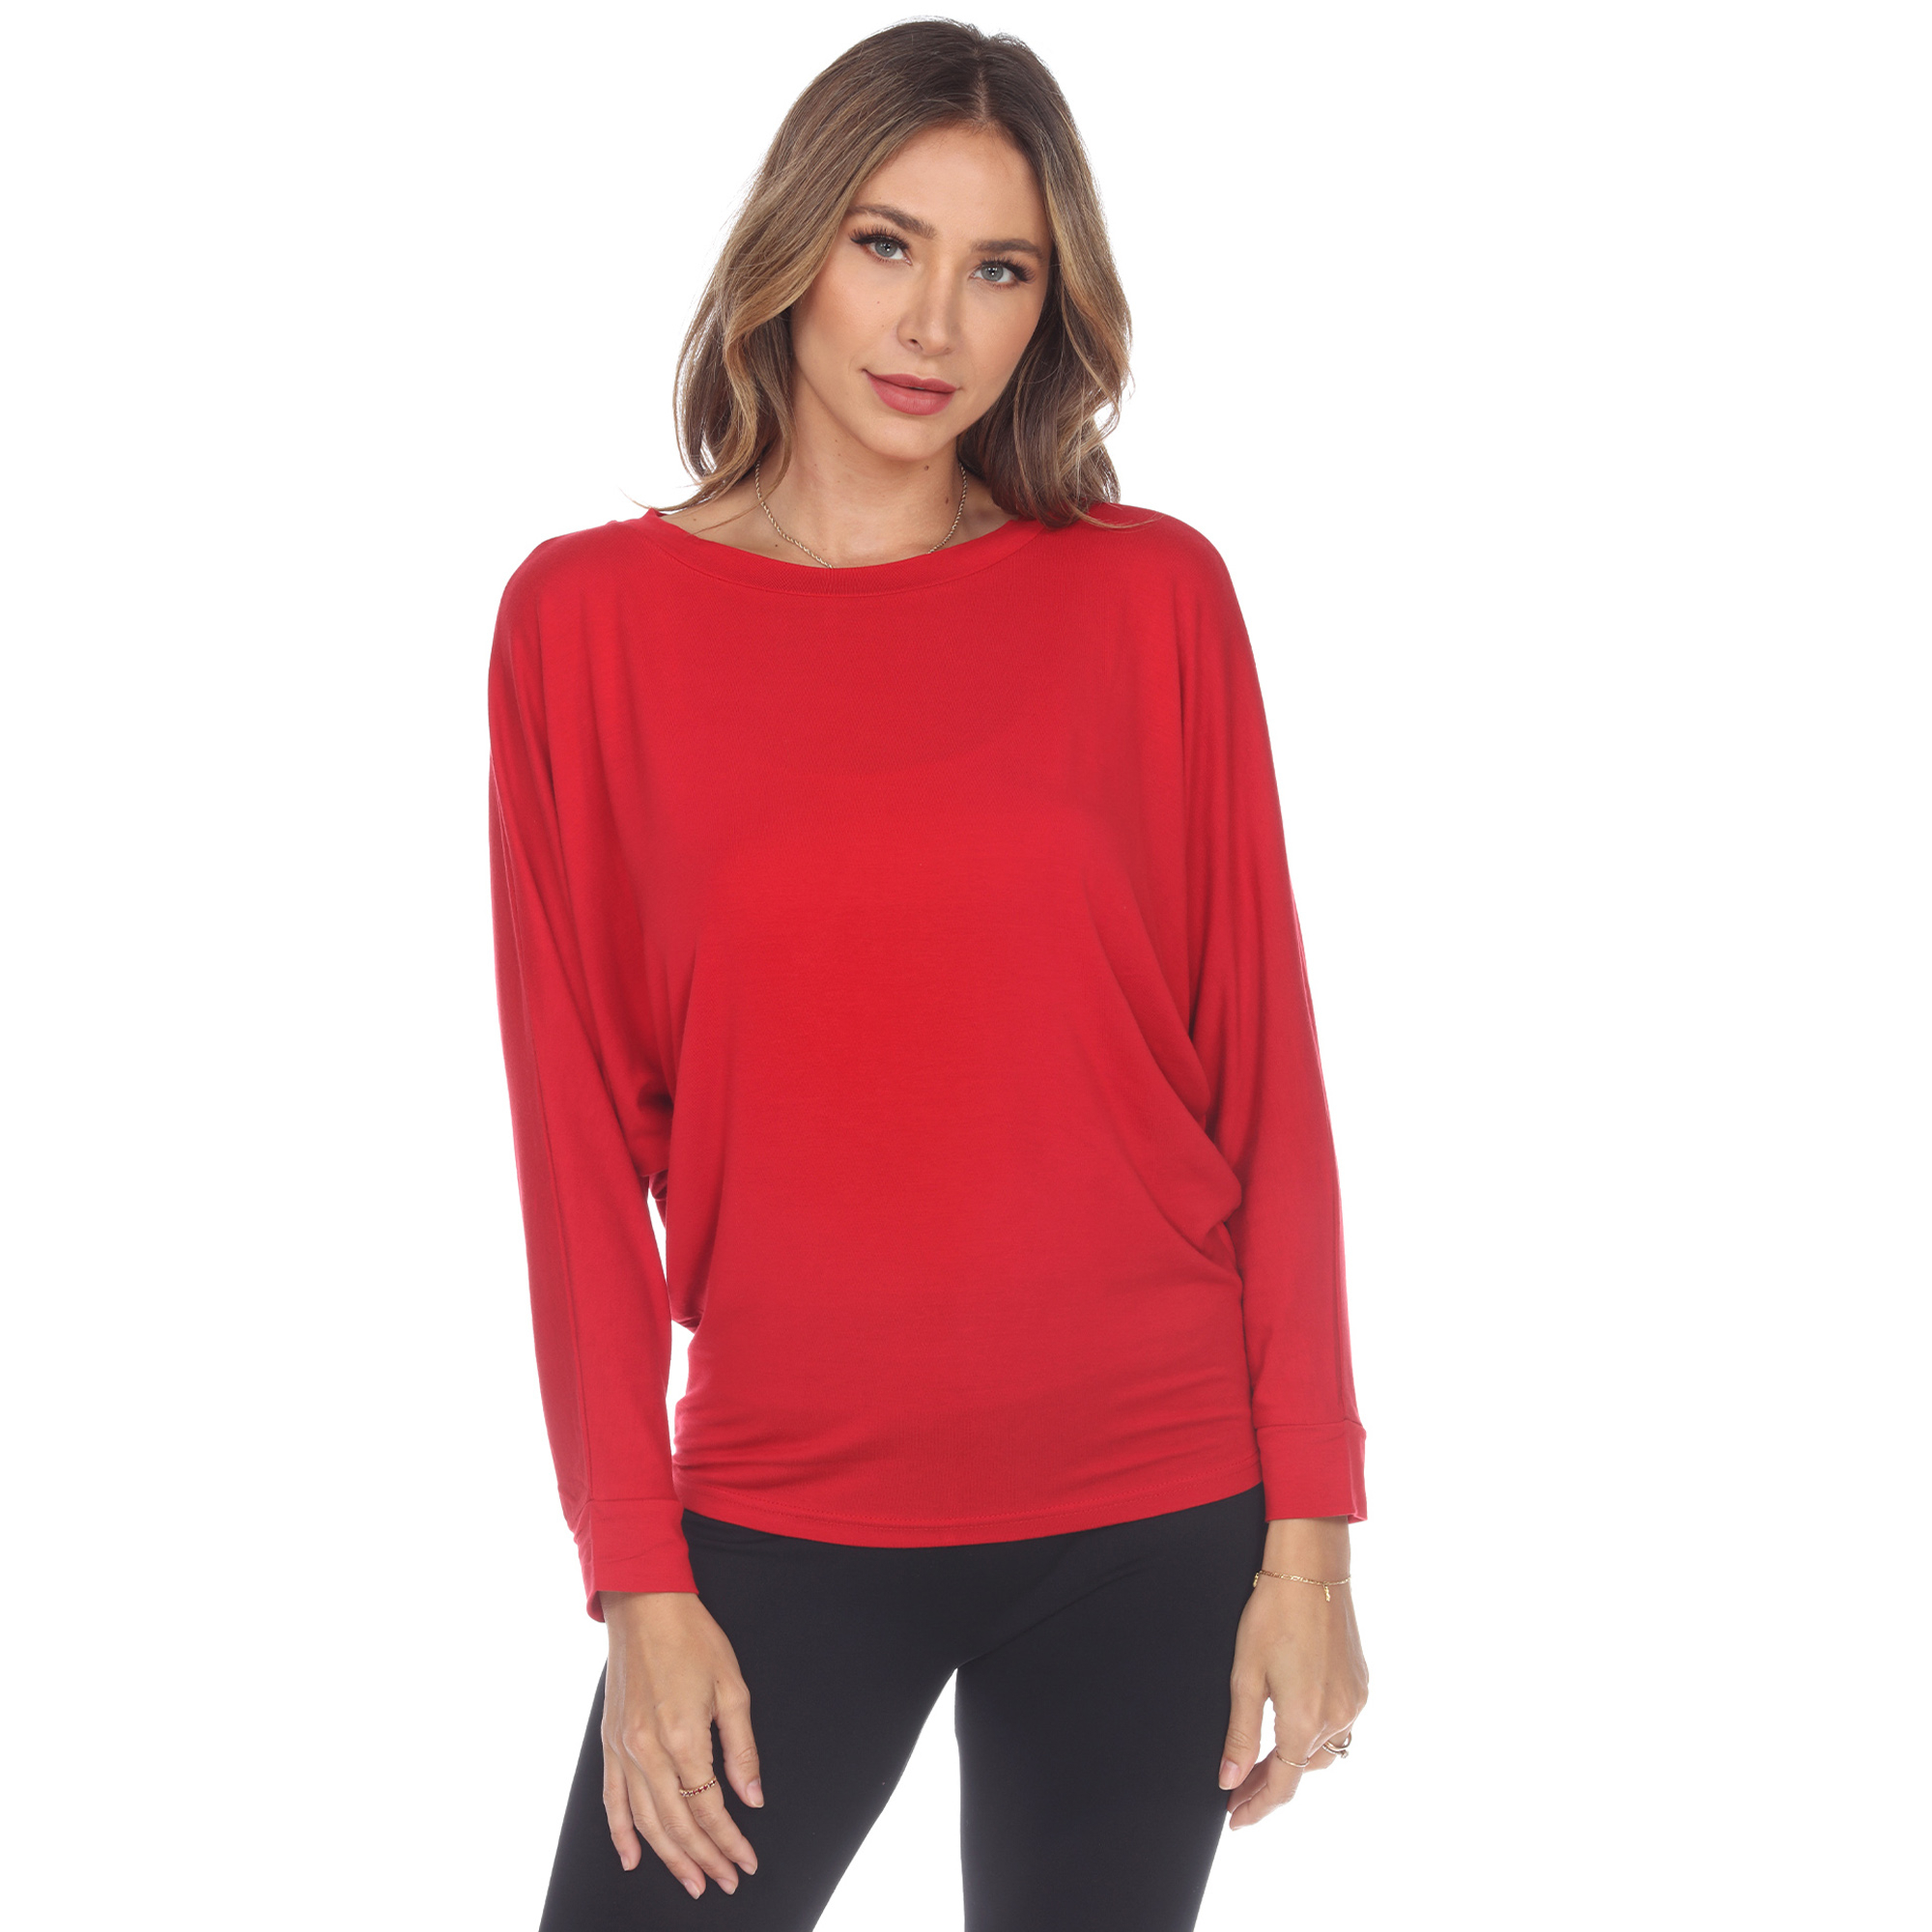 White Mark Women's Banded Dolman Top - Red, 3X